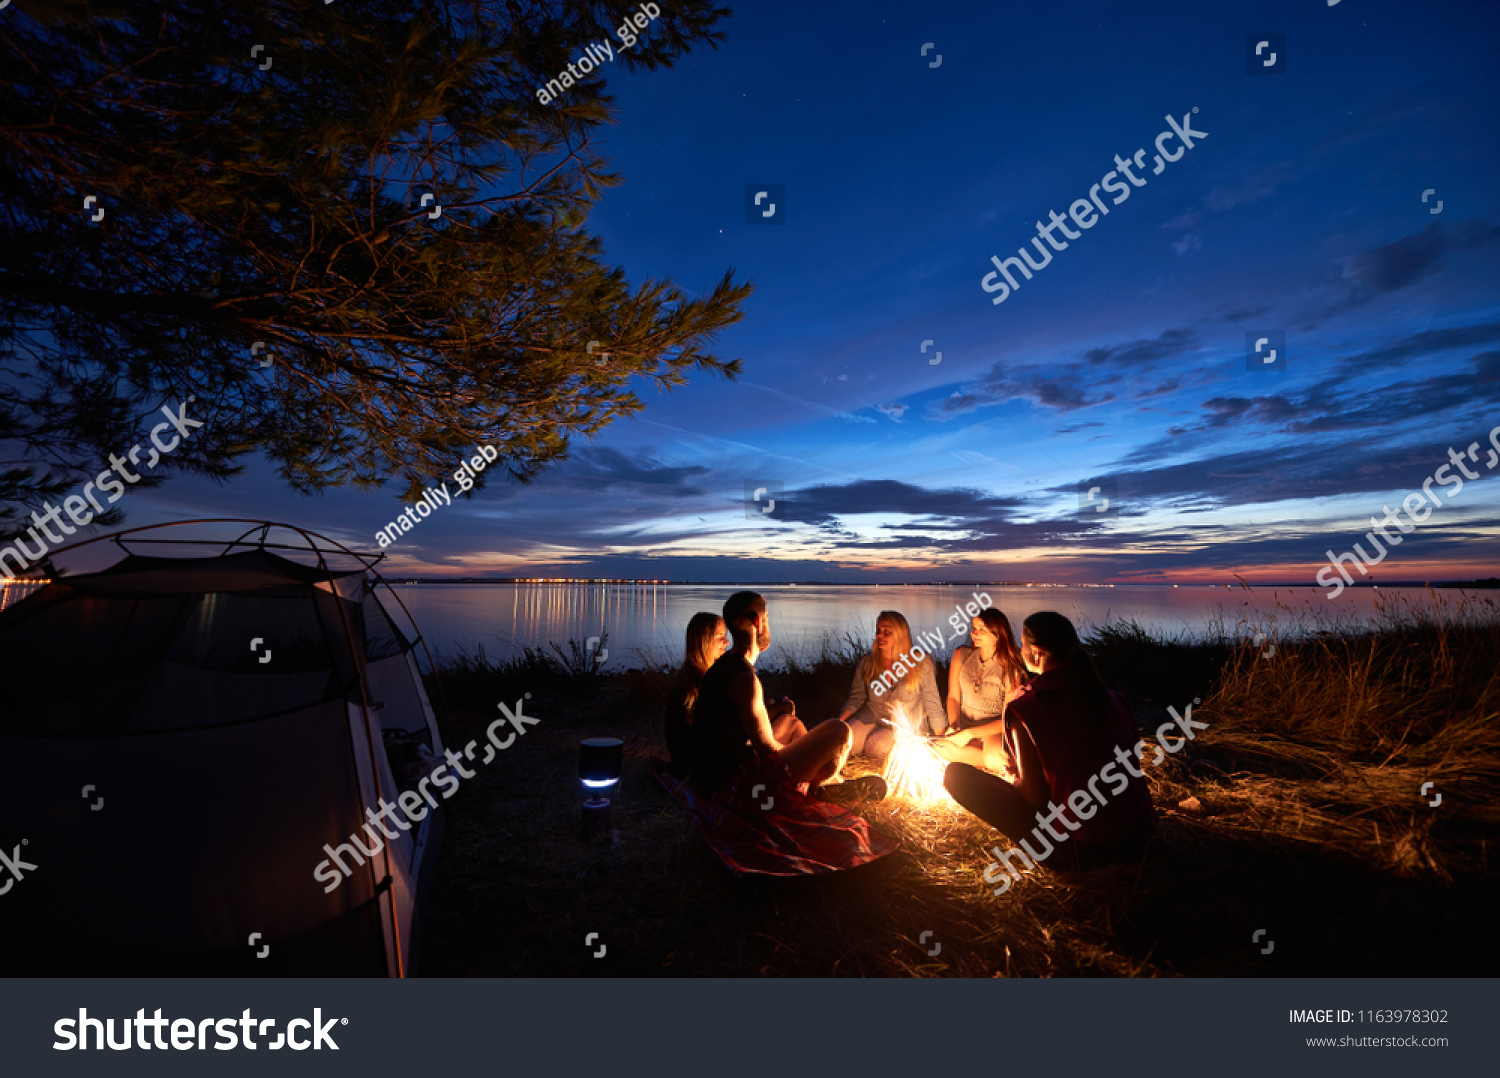 Night summer camping on sea shore. Group of five young tourists sitting on the beach around campfire near tent under beautiful blue evening sky. Tourism, friendship and beauty of nature concept. #1163978302